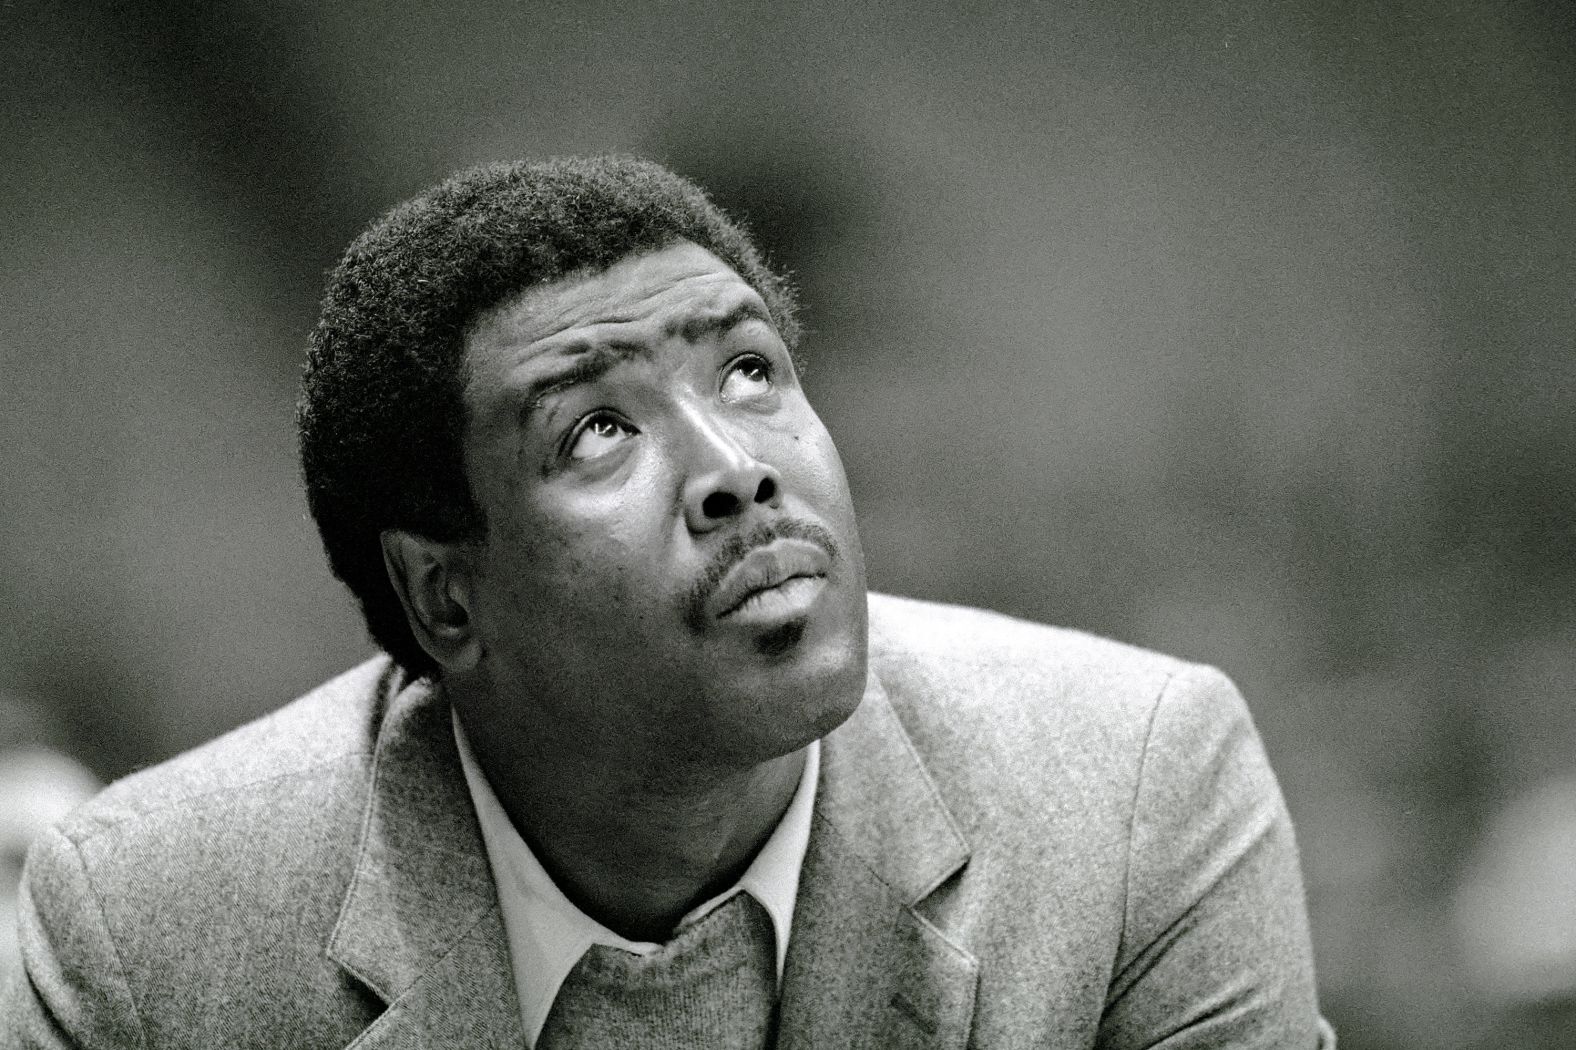 Former NBA All-Star and longtime head coach <a href="index.php?page=&url=https%3A%2F%2Fwww.cnn.com%2F2022%2F12%2F11%2Fus%2Fpaul-silas-nba-player-coach-obit-spt-intl%2Findex.html" target="_blank">Paul Silas</a> died at the of age 79 on December 11. Silas was a three-time NBA champion in his 16 seasons as a player.